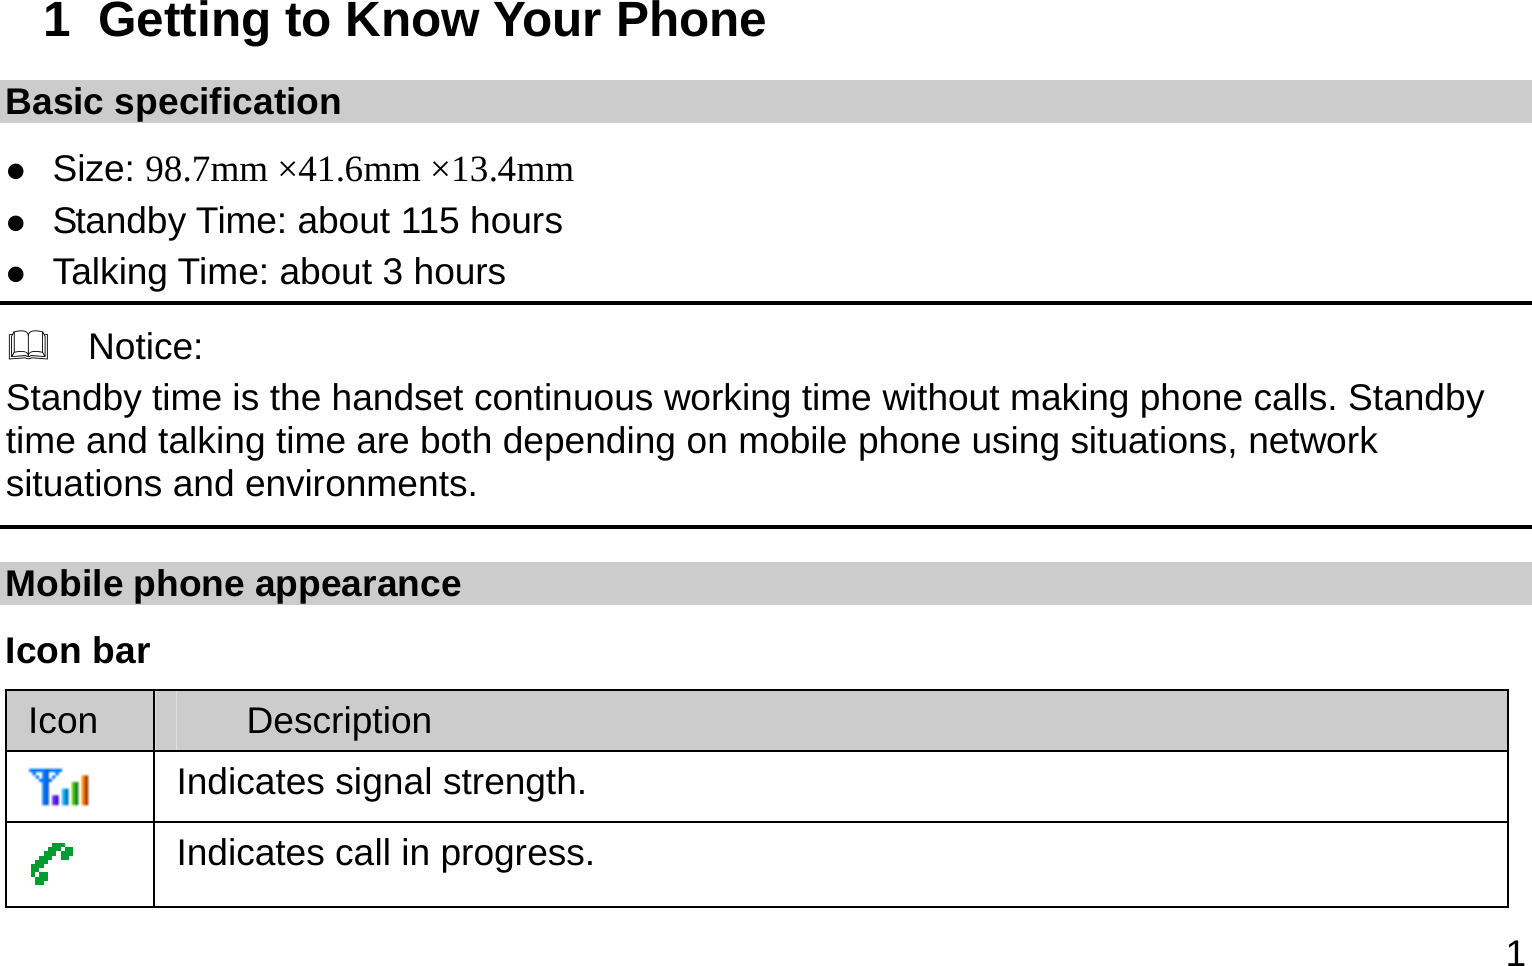  1 1  Getting to Know Your Phone Basic specification  Size: 98.7mm ×41.6mm ×13.4mm  Standby Time: about 115 hours  Talking Time: about 3 hours   Notice: Standby time is the handset continuous working time without making phone calls. Standby time and talking time are both depending on mobile phone using situations, network situations and environments.   Mobile phone appearance Icon bar Icon  Description  Indicates signal strength.  Indicates call in progress. 